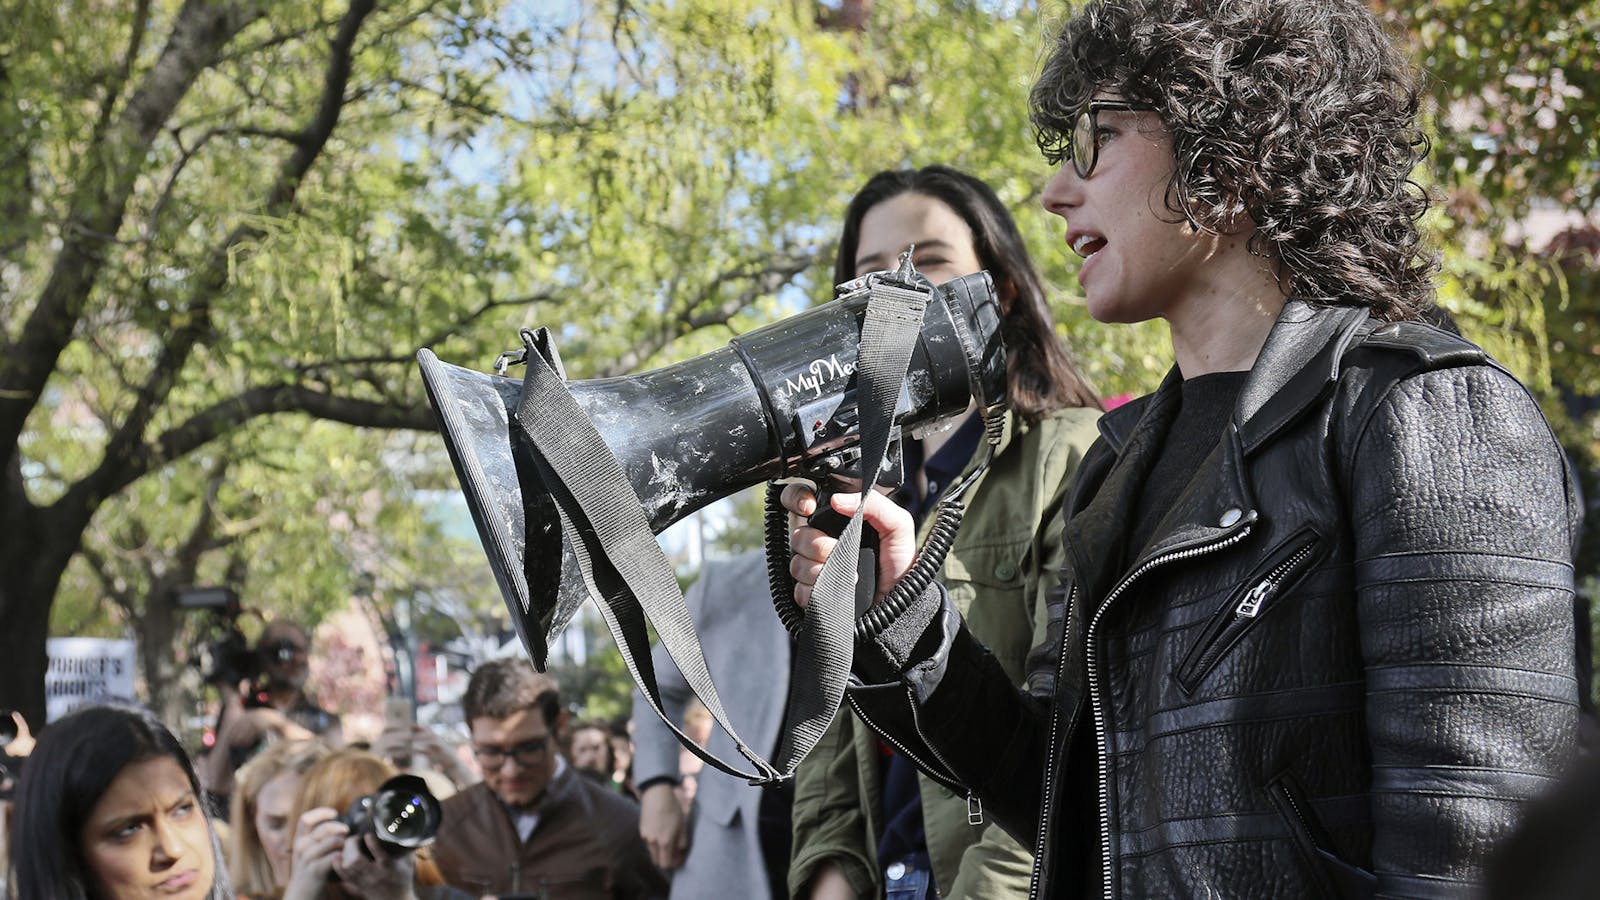 Meredith Whittaker, a research scientist at NYU, addresses Google employees during a protest rally in New York in 2018. Photo by Bloomberg